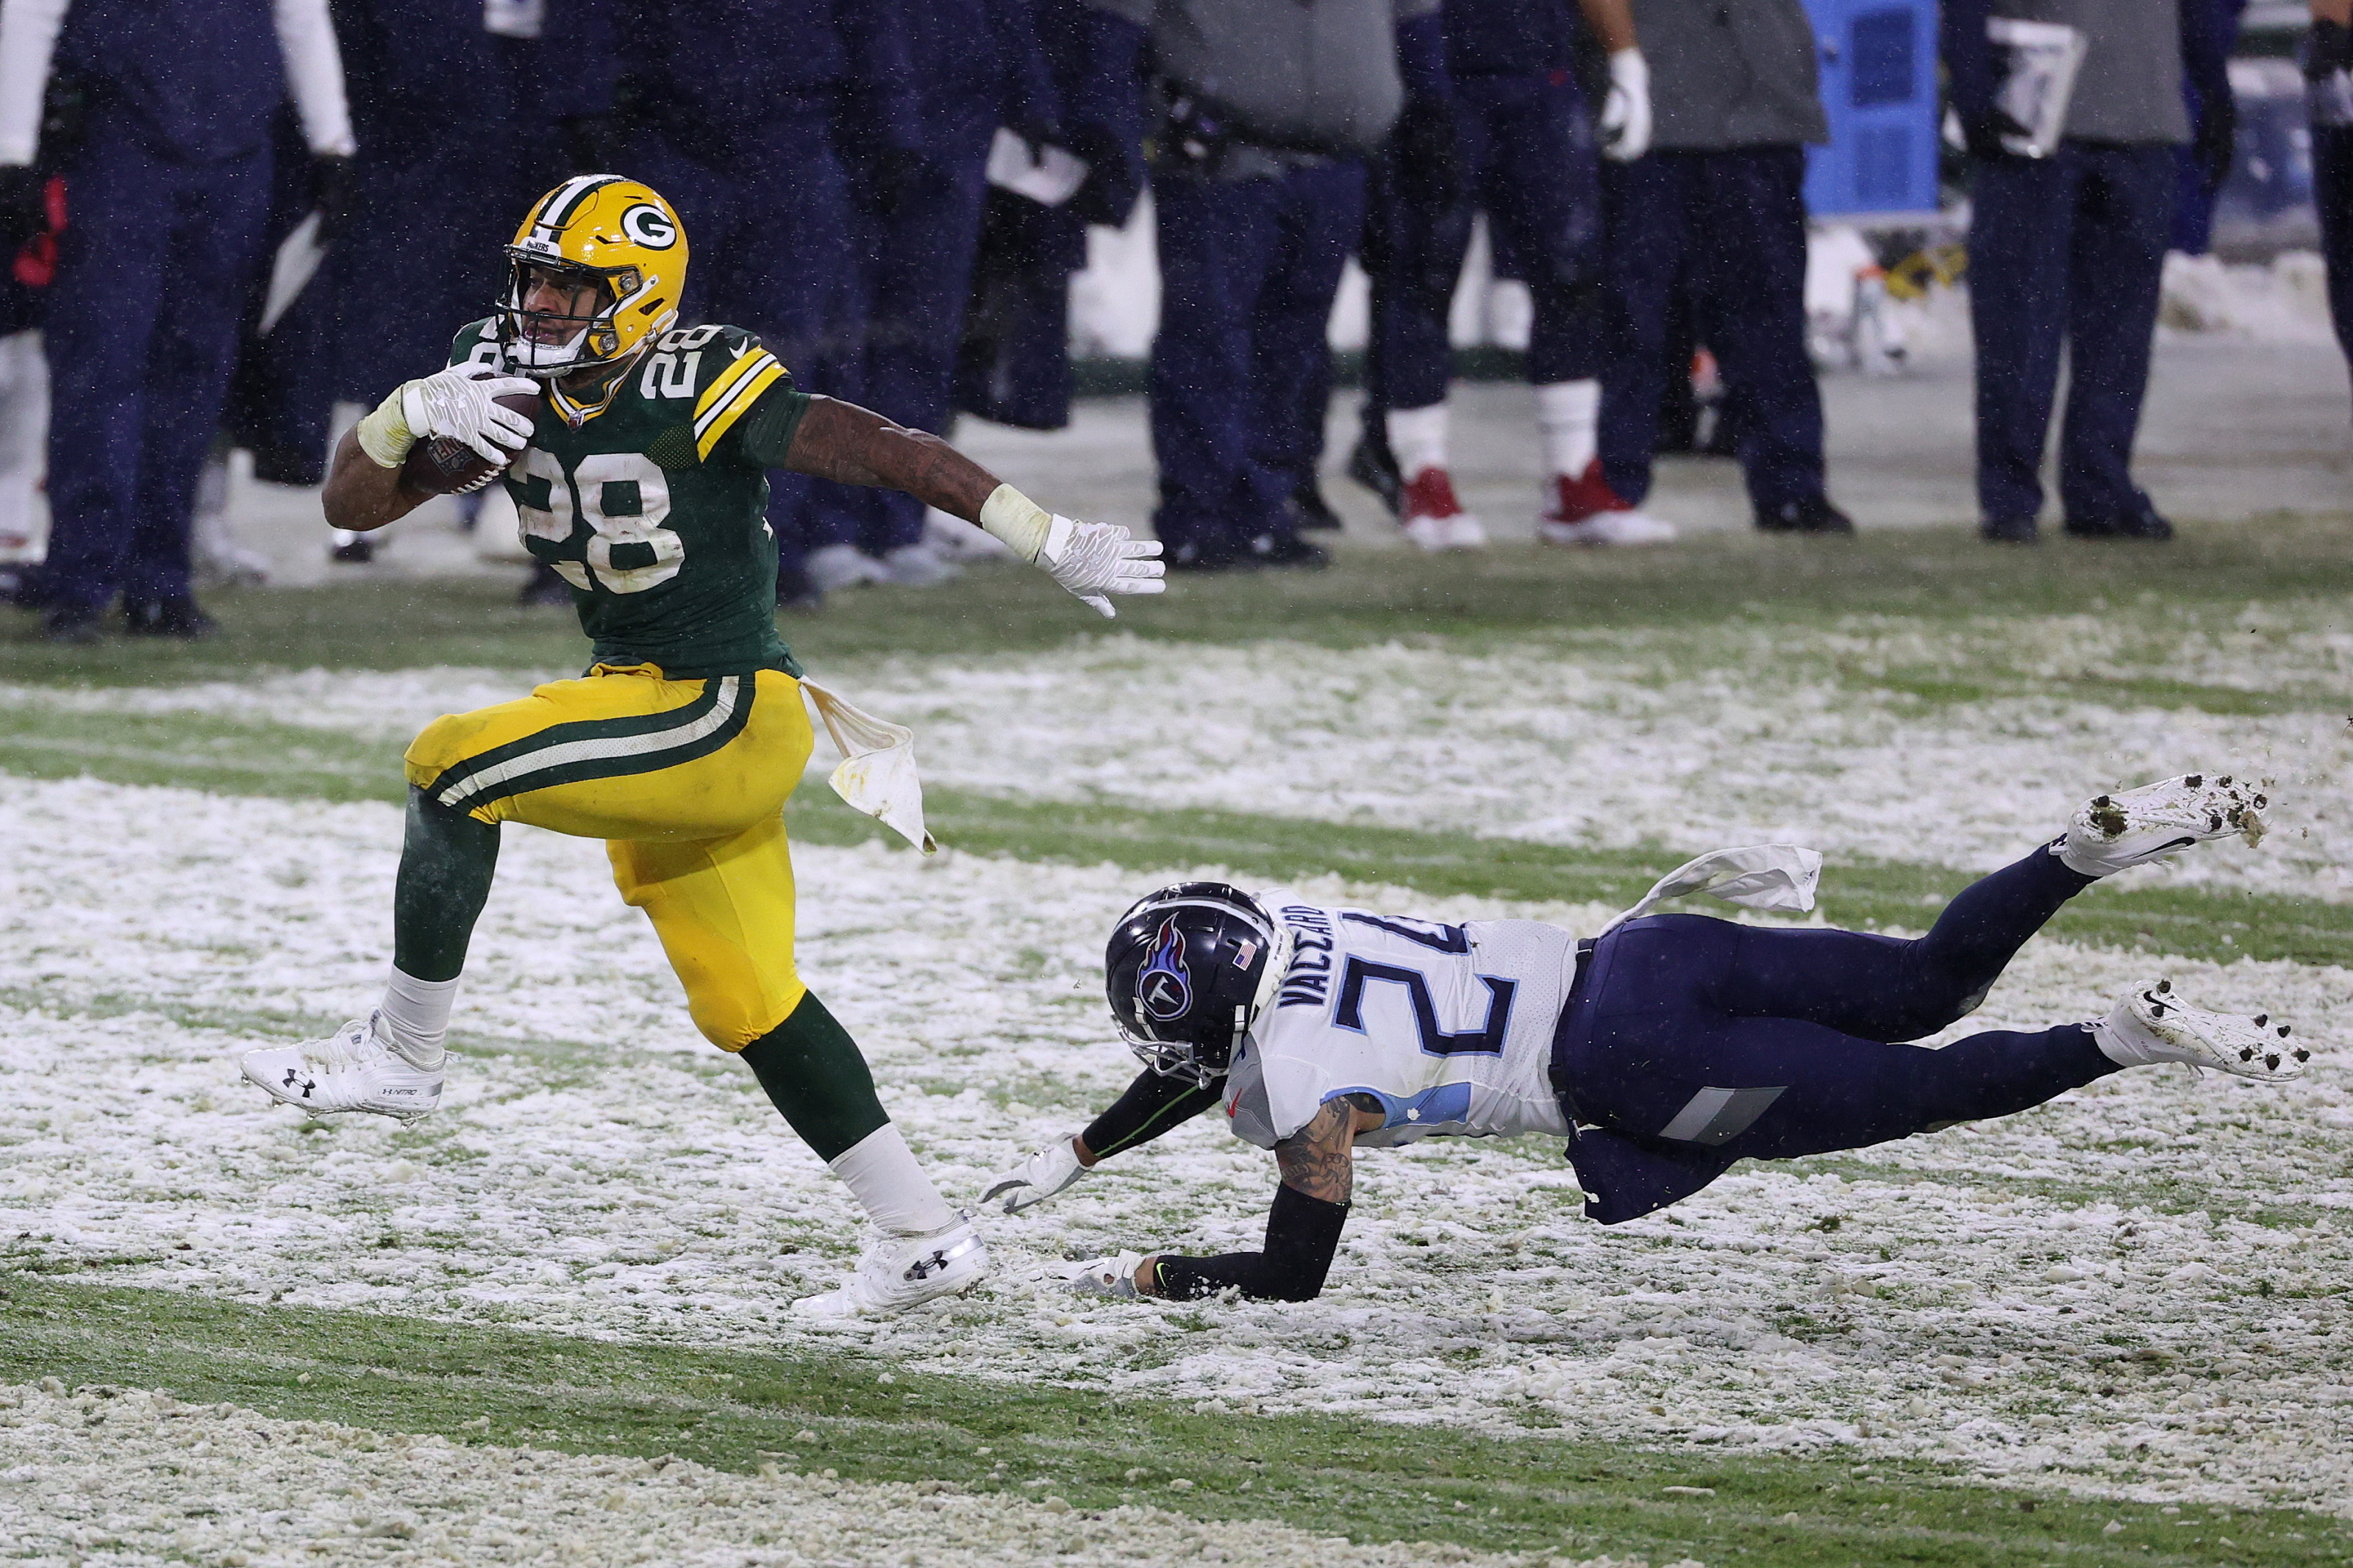 Home-Field Disadvantage? The Green Bay Packers Have Struggled At